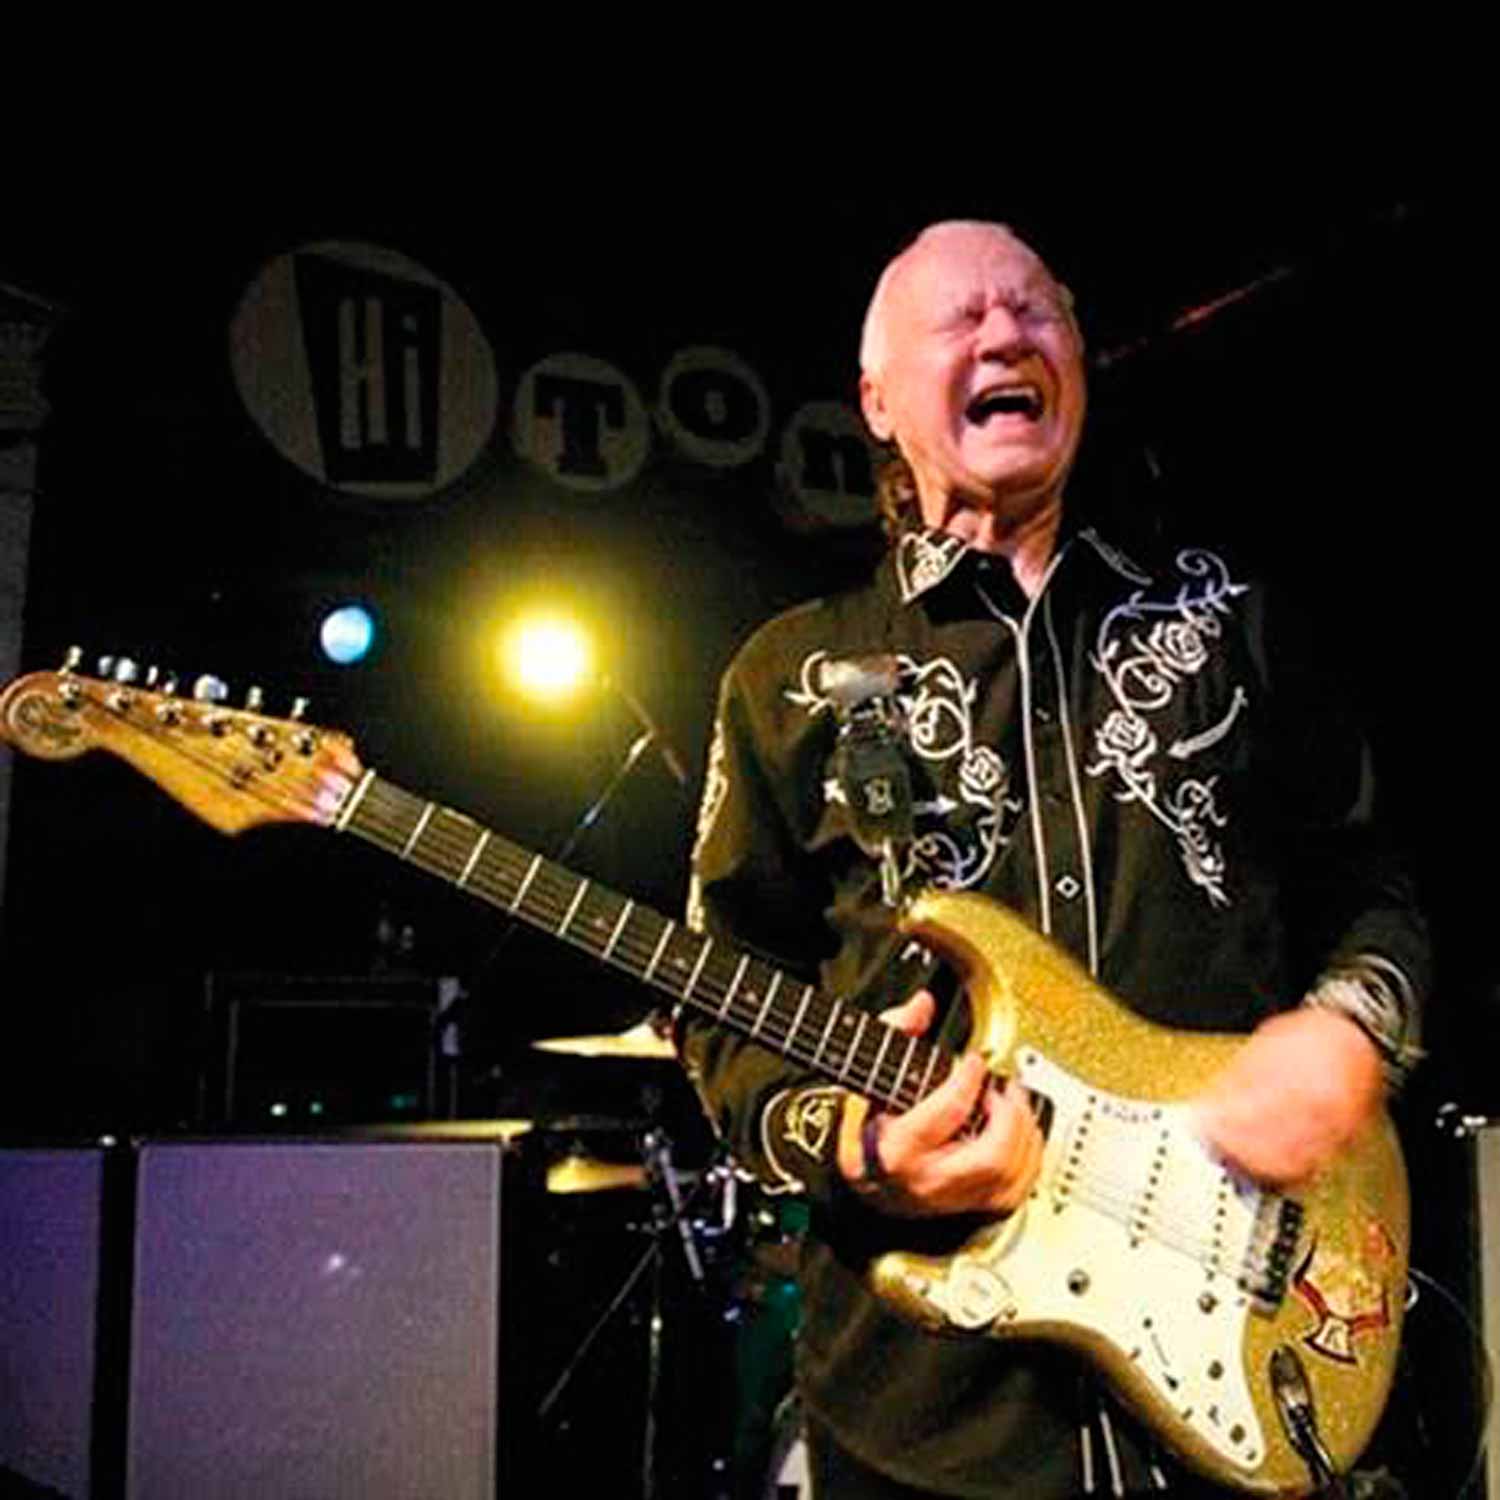 Dick dale plays pain